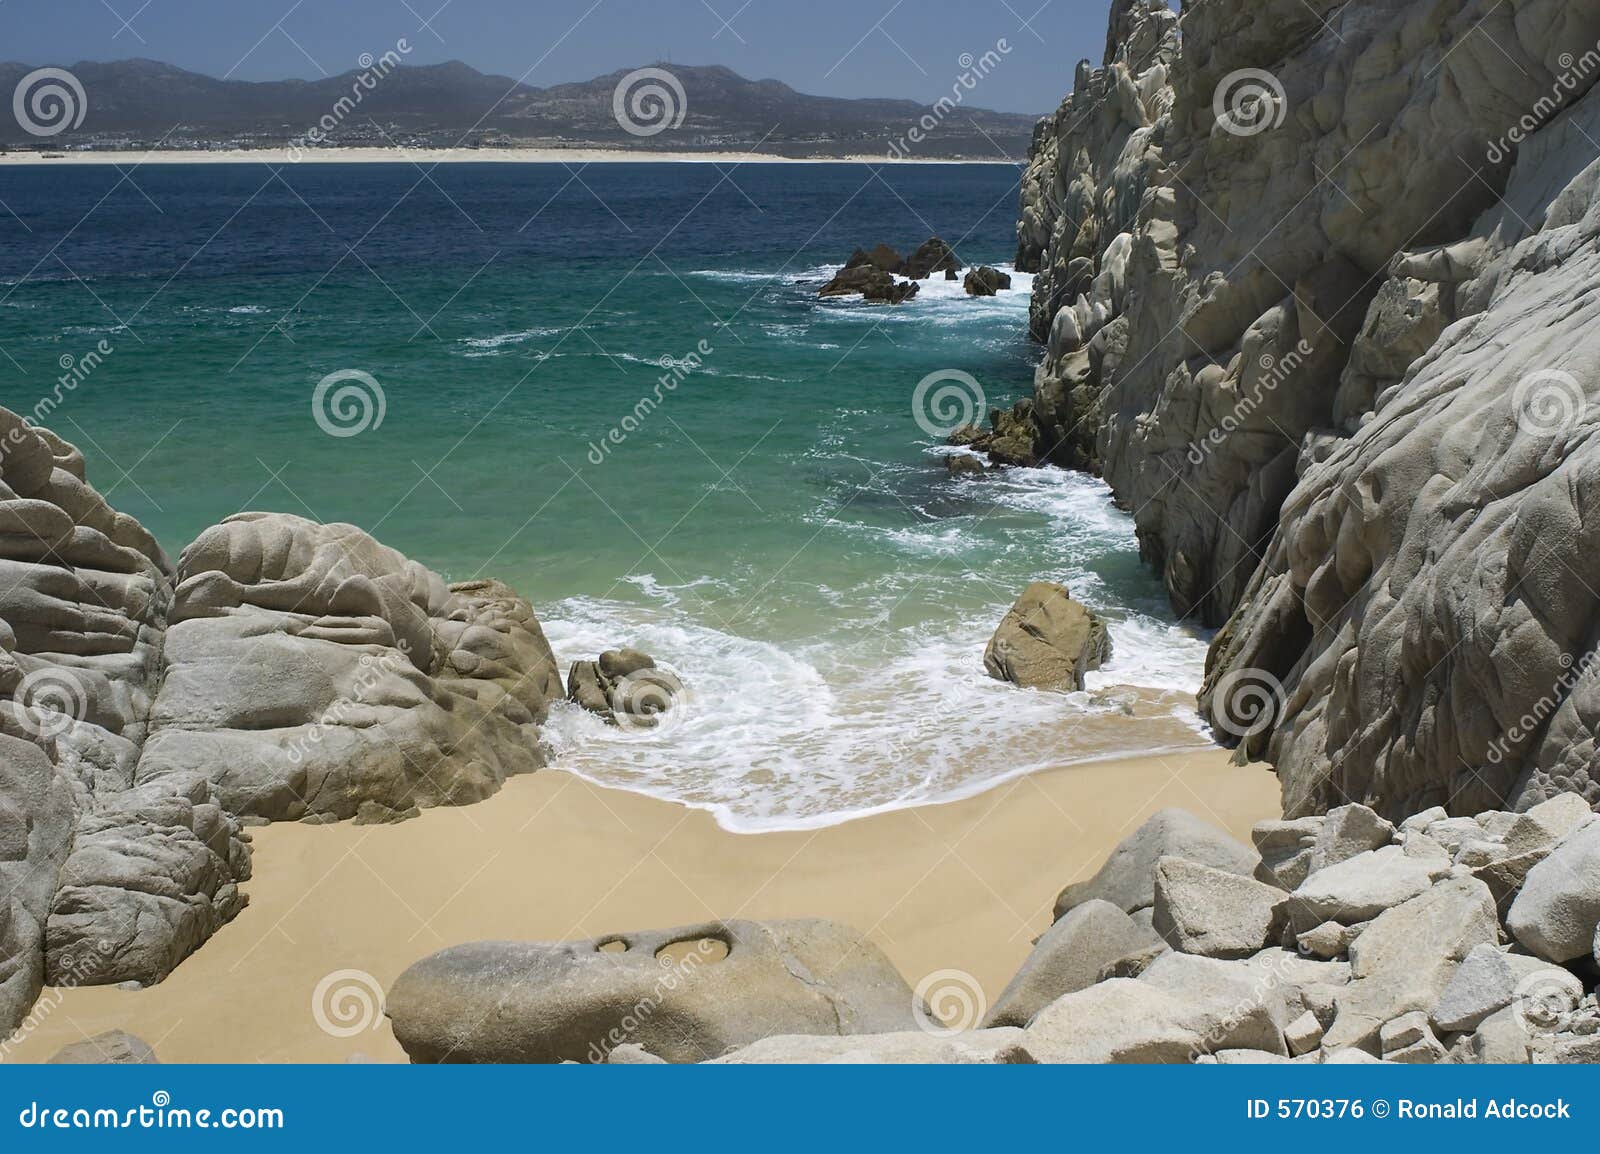 secluded beach at lands end